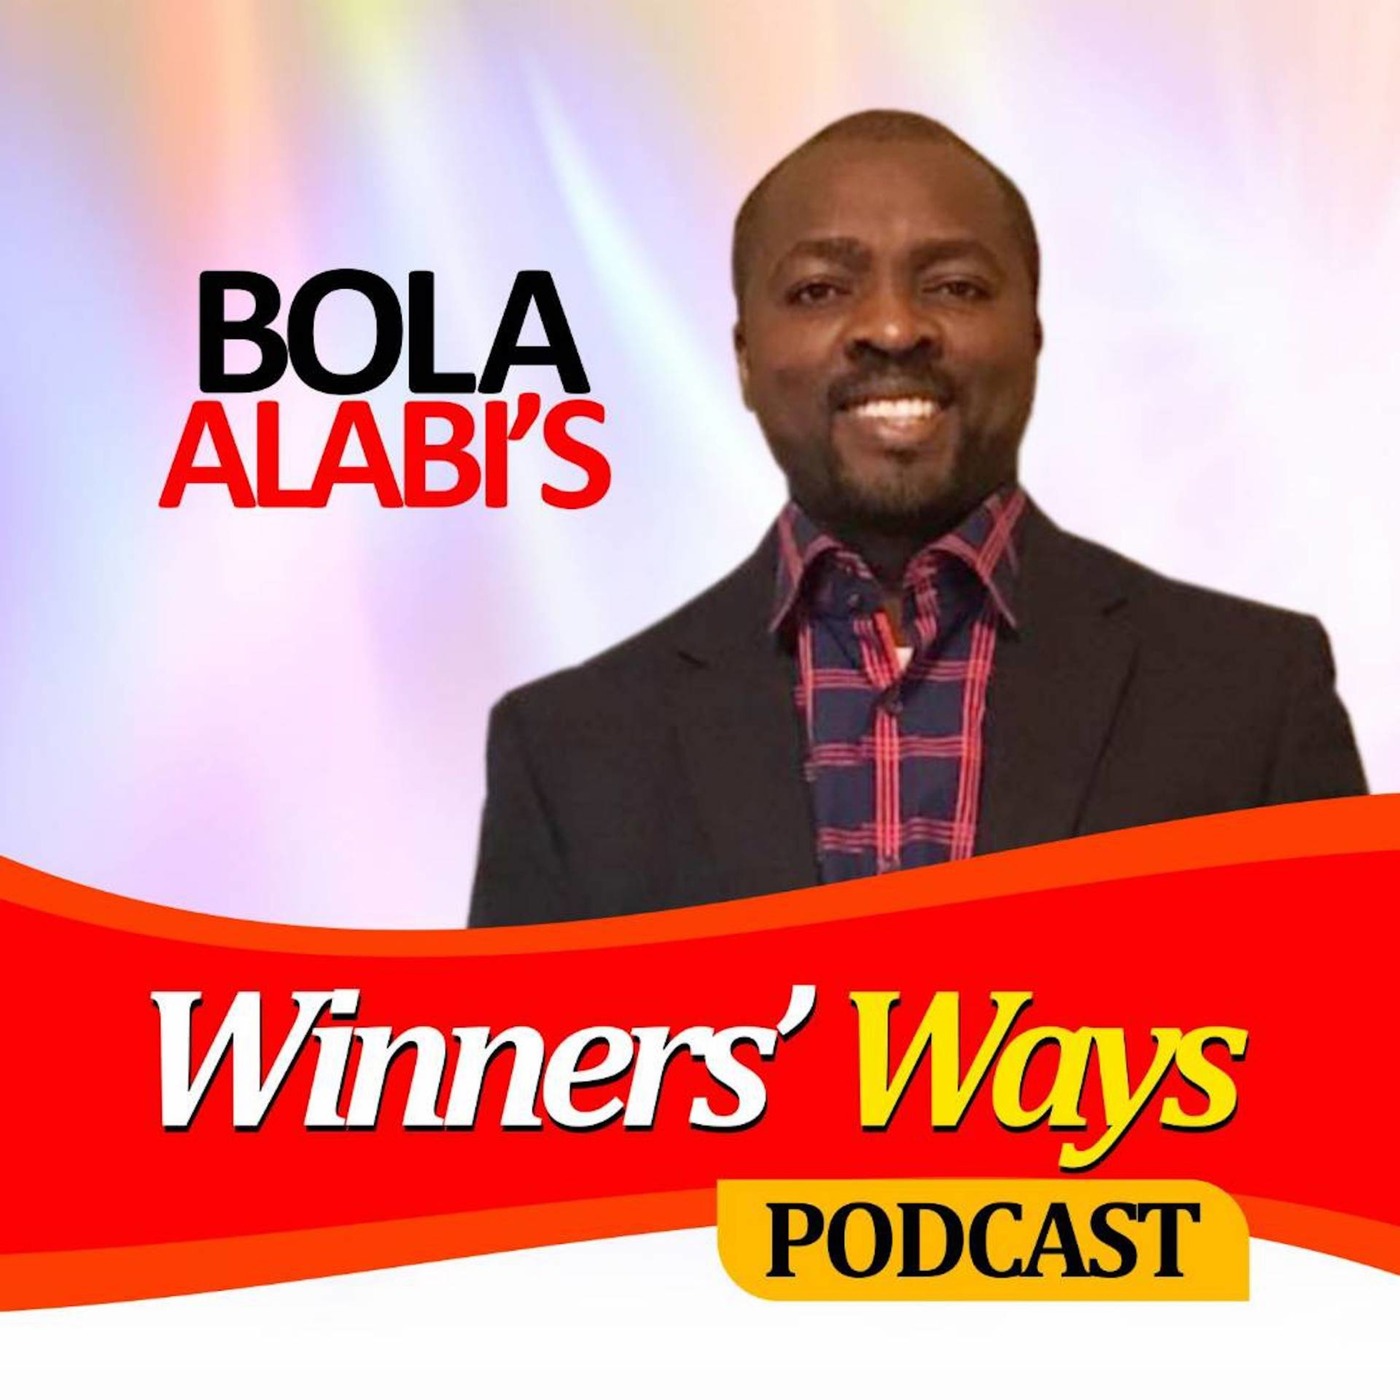 #164: How to be a great team player in the workplace with Bola Alabi